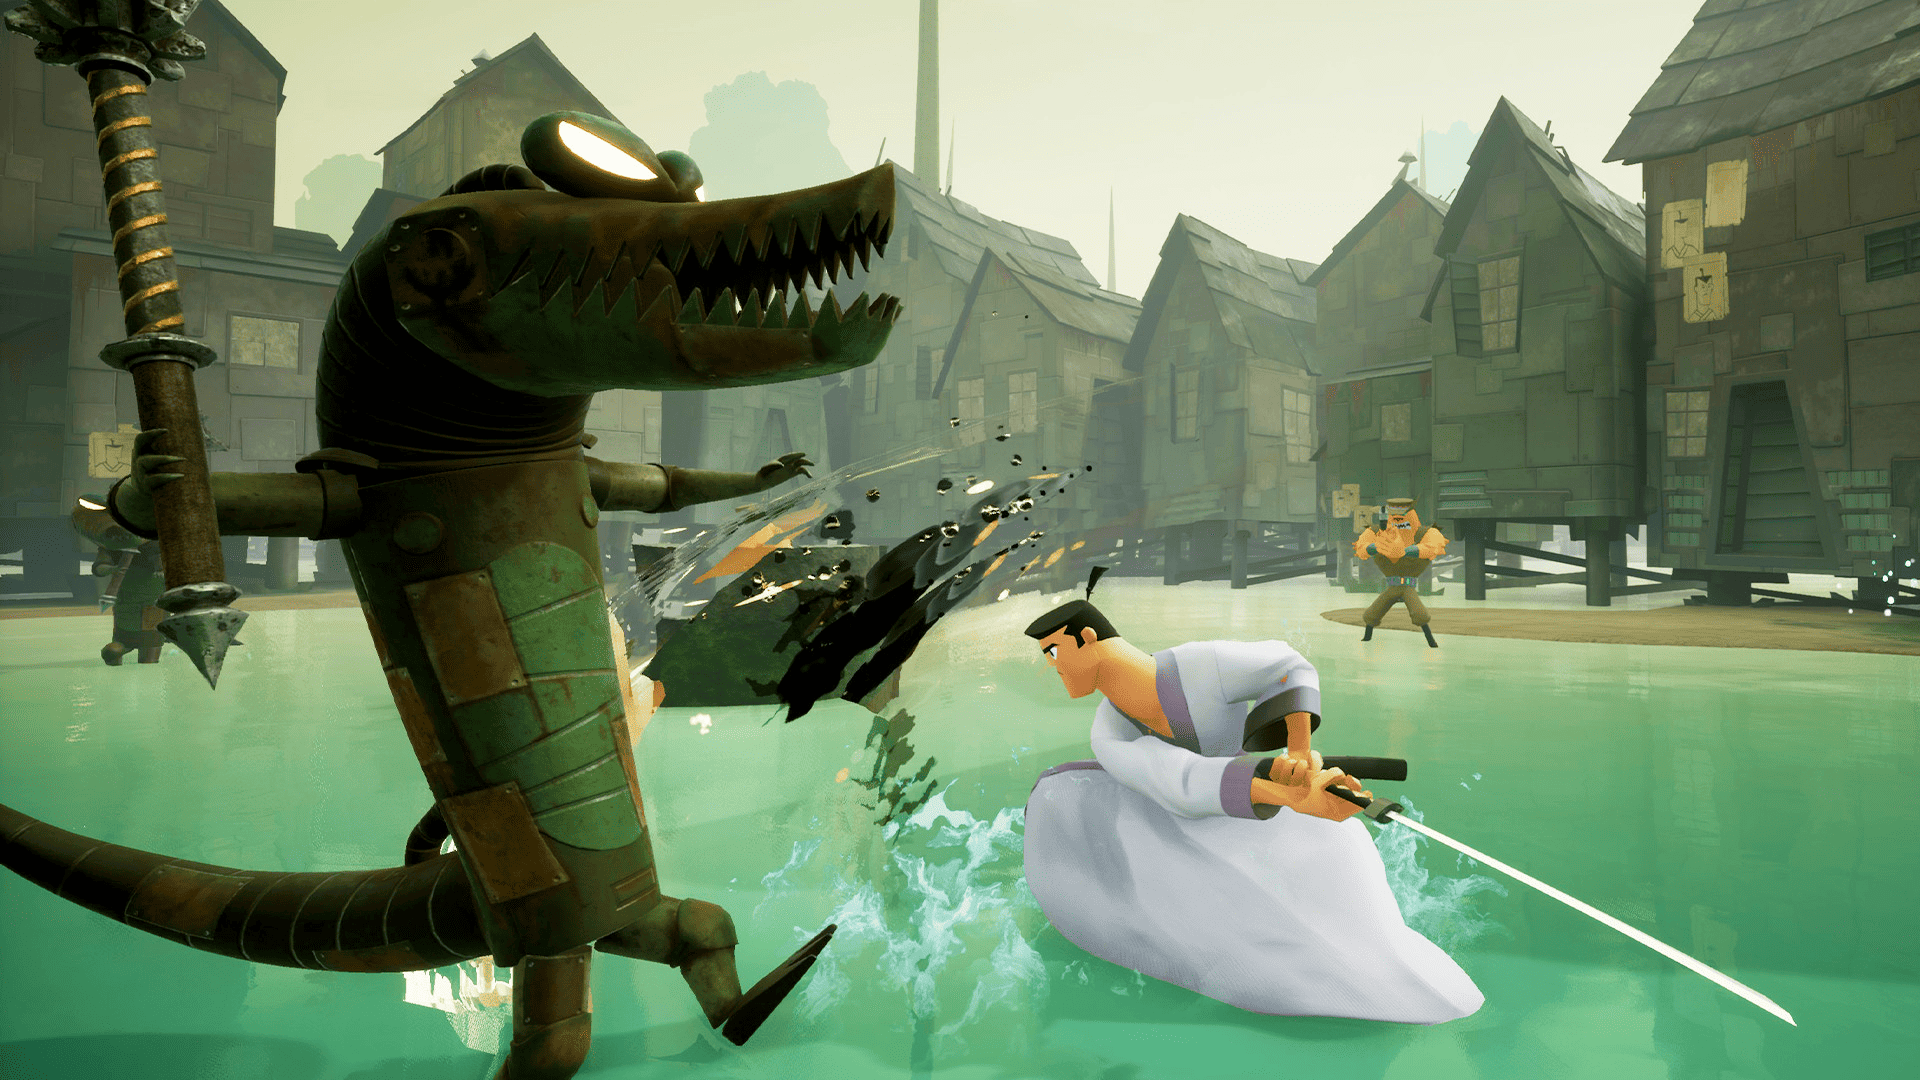 In the water, a man wields a sword while facing a crocodile.